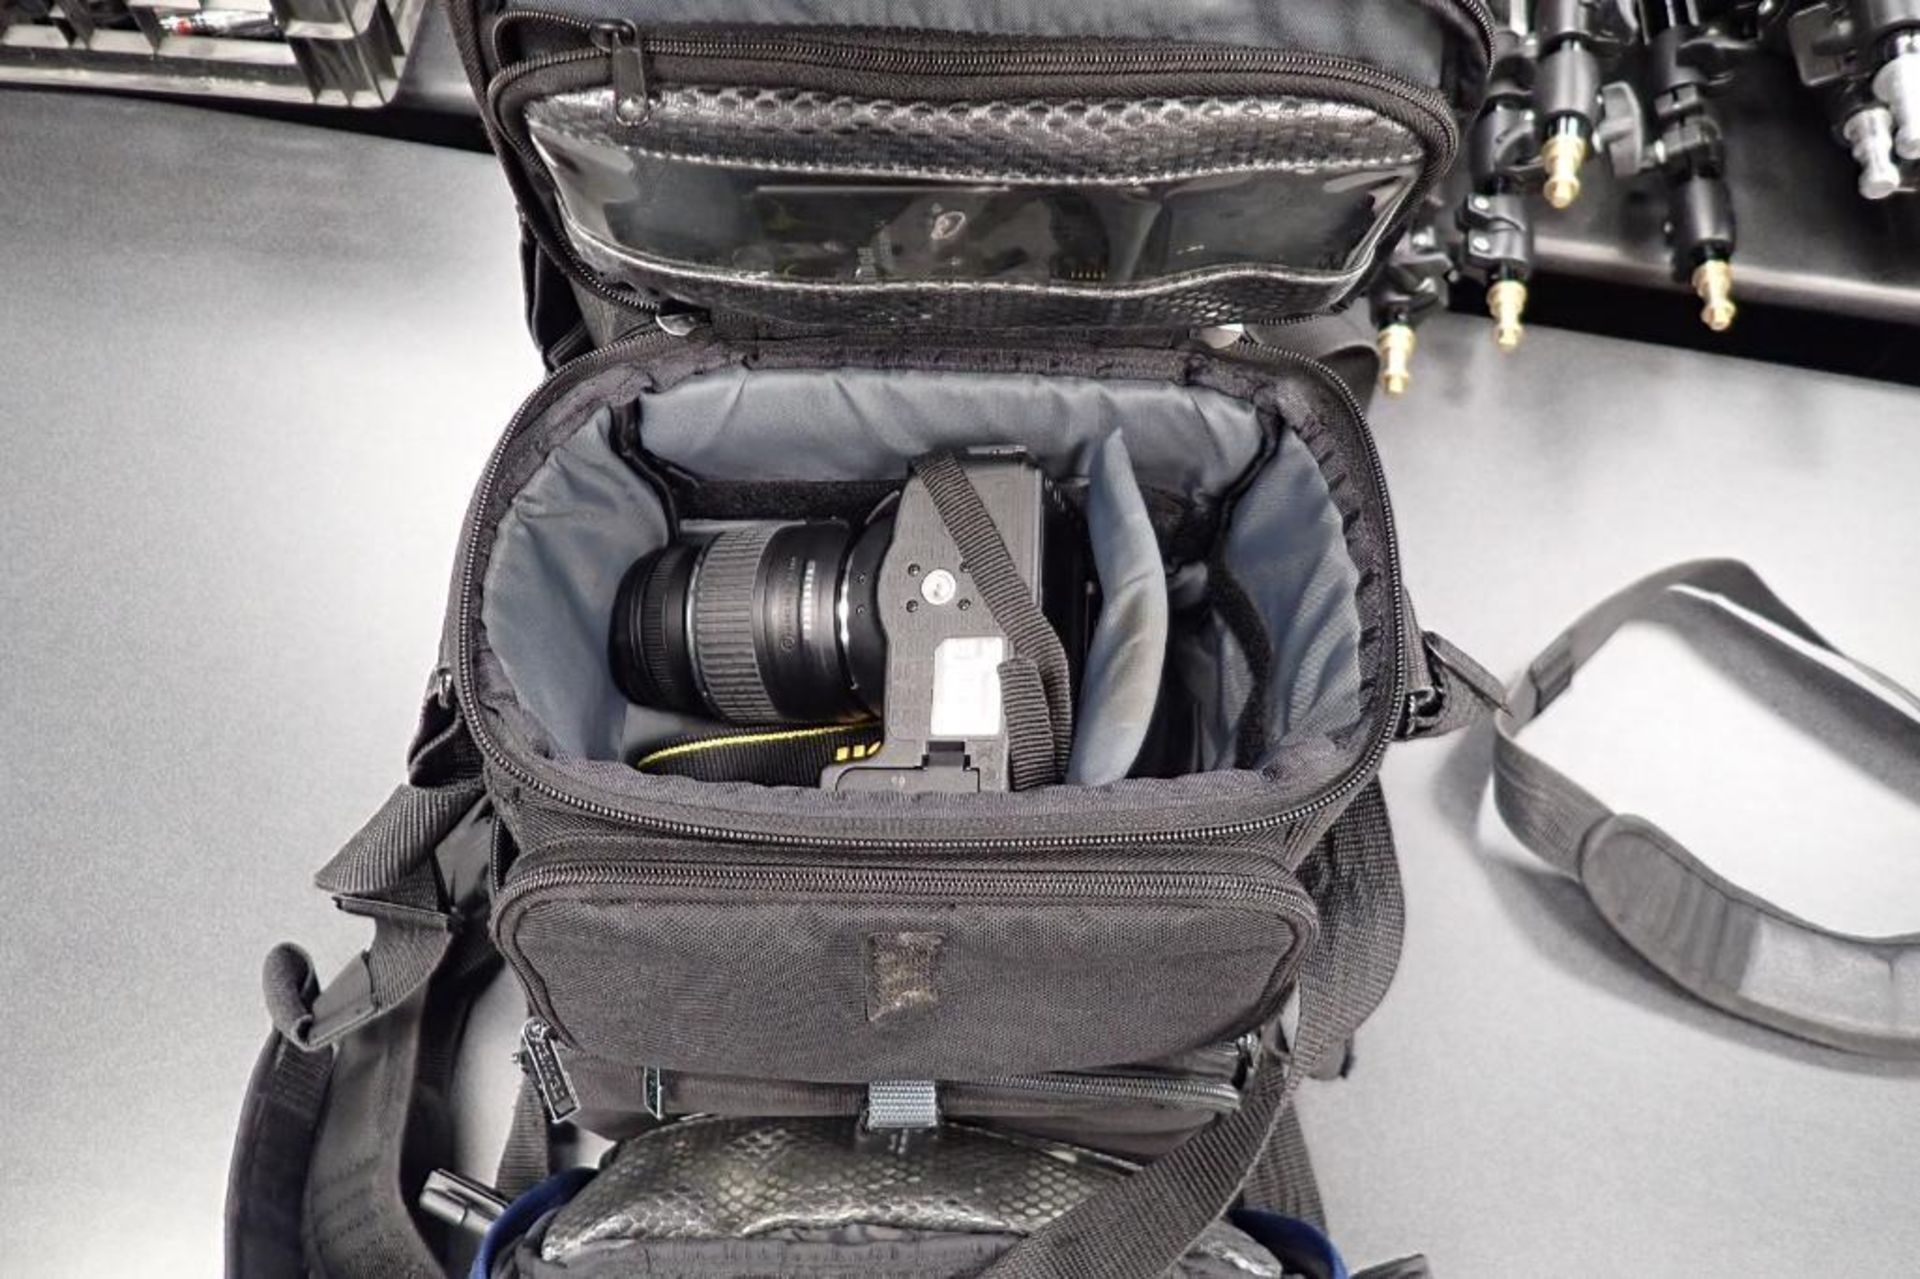 Nikon D3300 professional camera with case - Image 5 of 7